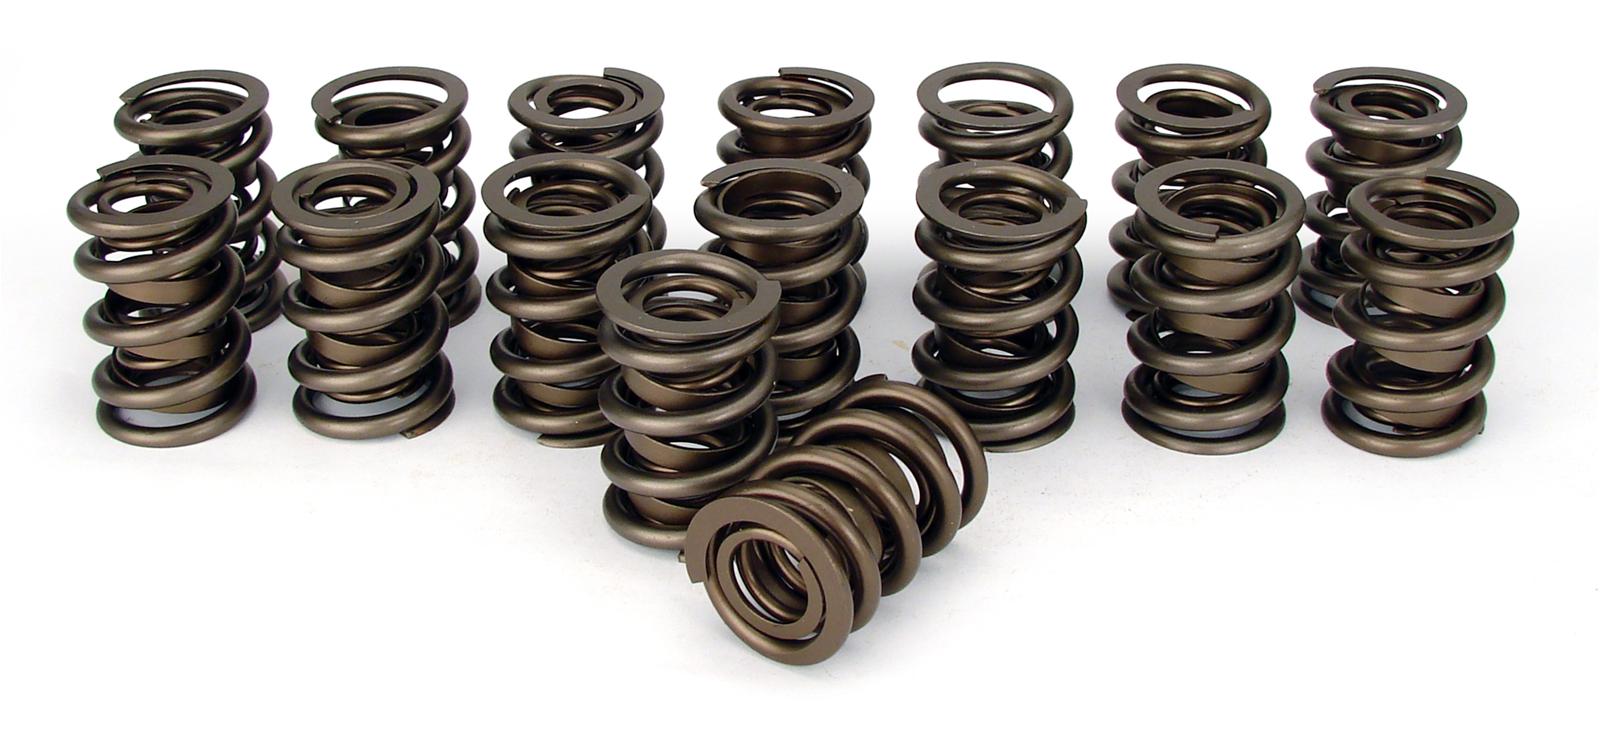 COMP Cams 991-16 COMP Cams Valve Springs | Summit Racing